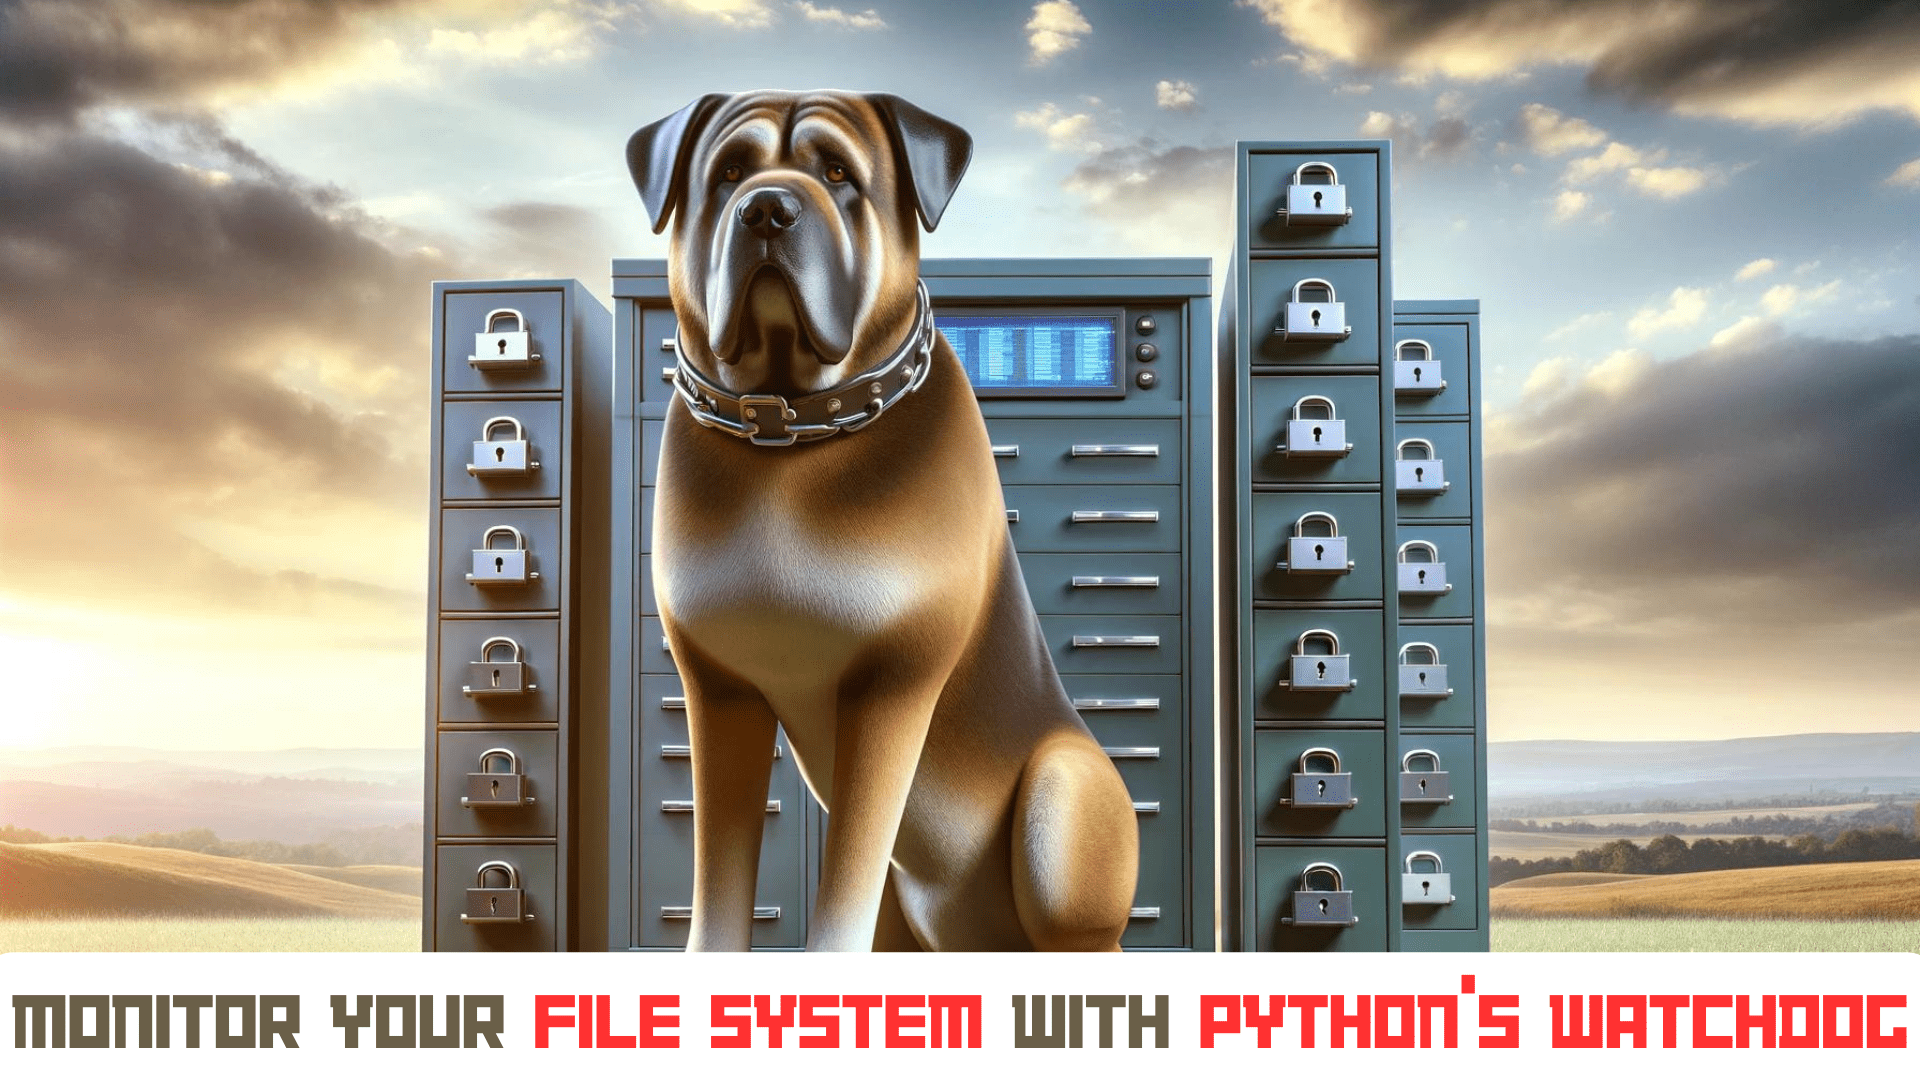 Monitor your file system with Python watchdog